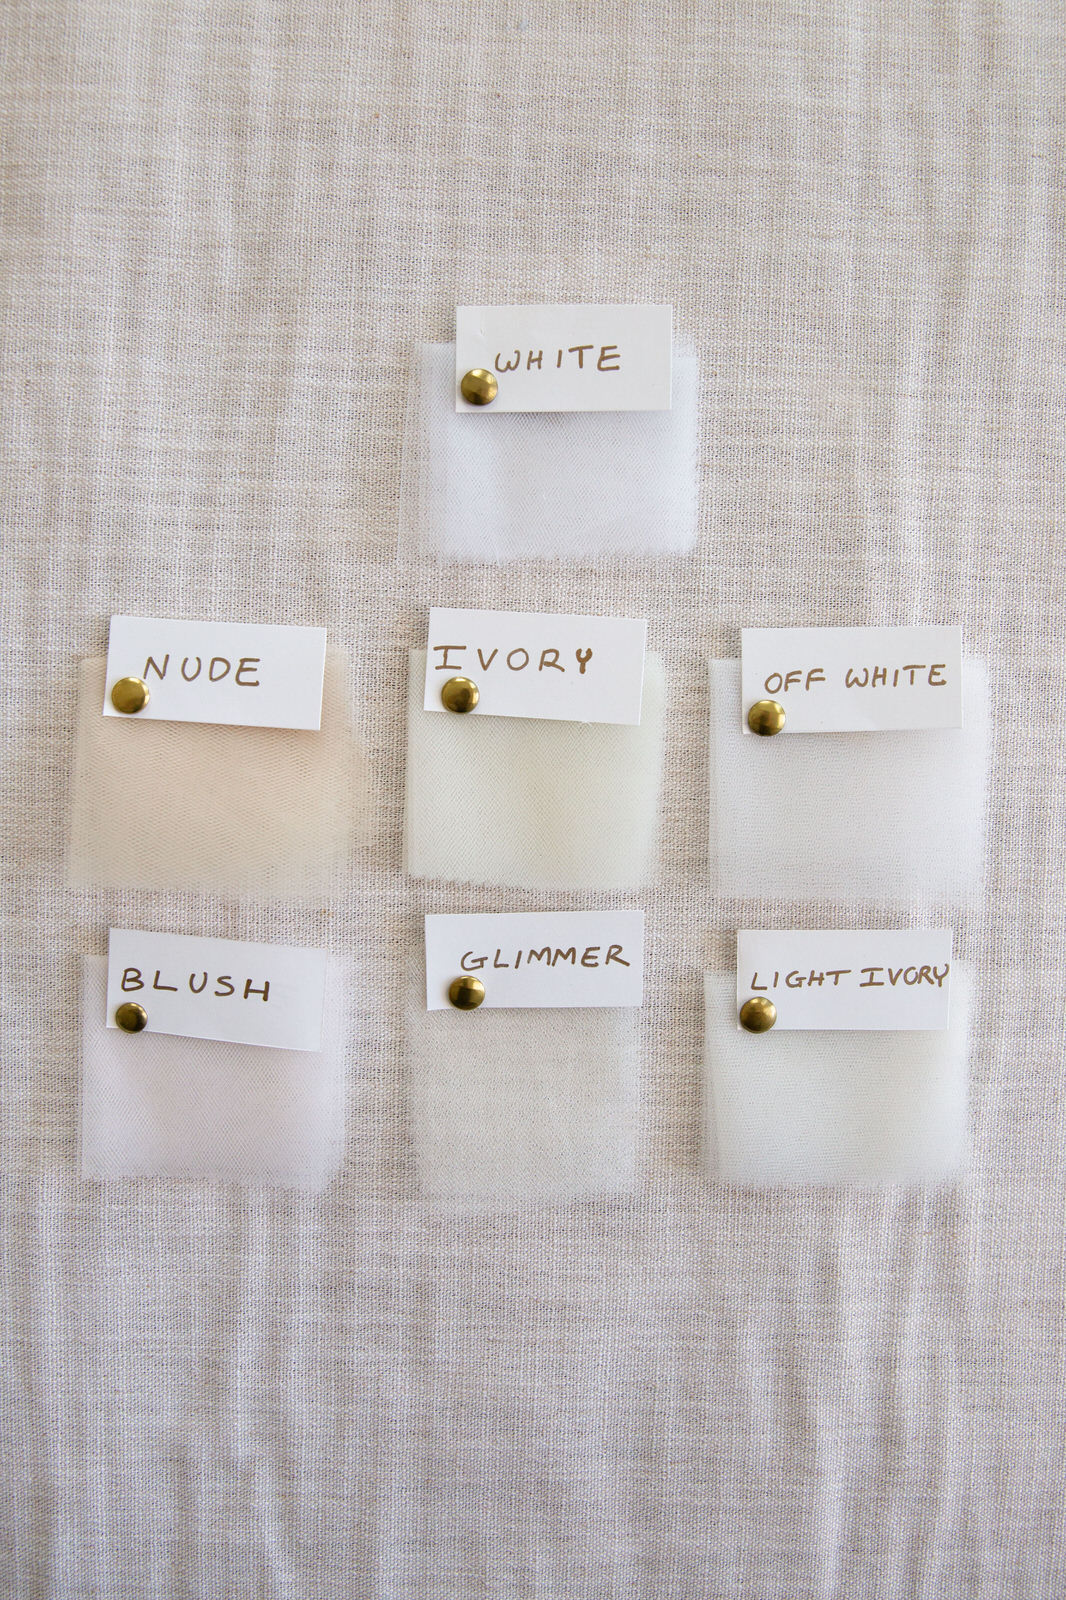 white off white and nontraditional color swatches for custom bridal veils and wedding accessories